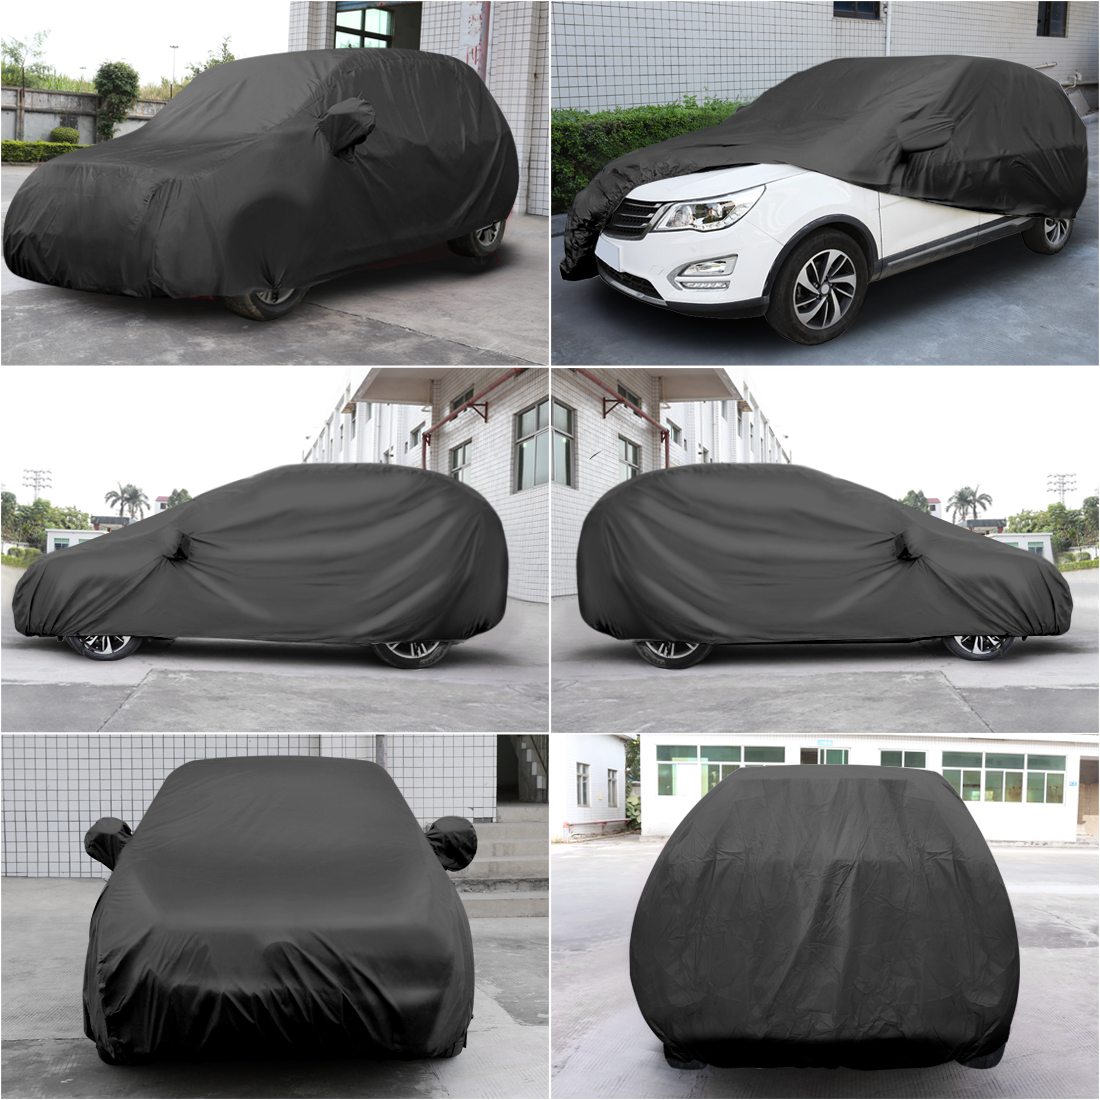 Durable Outdoor Stormproof Waterproof BreathableBlack Car Cover For Forster - image 3 of 7